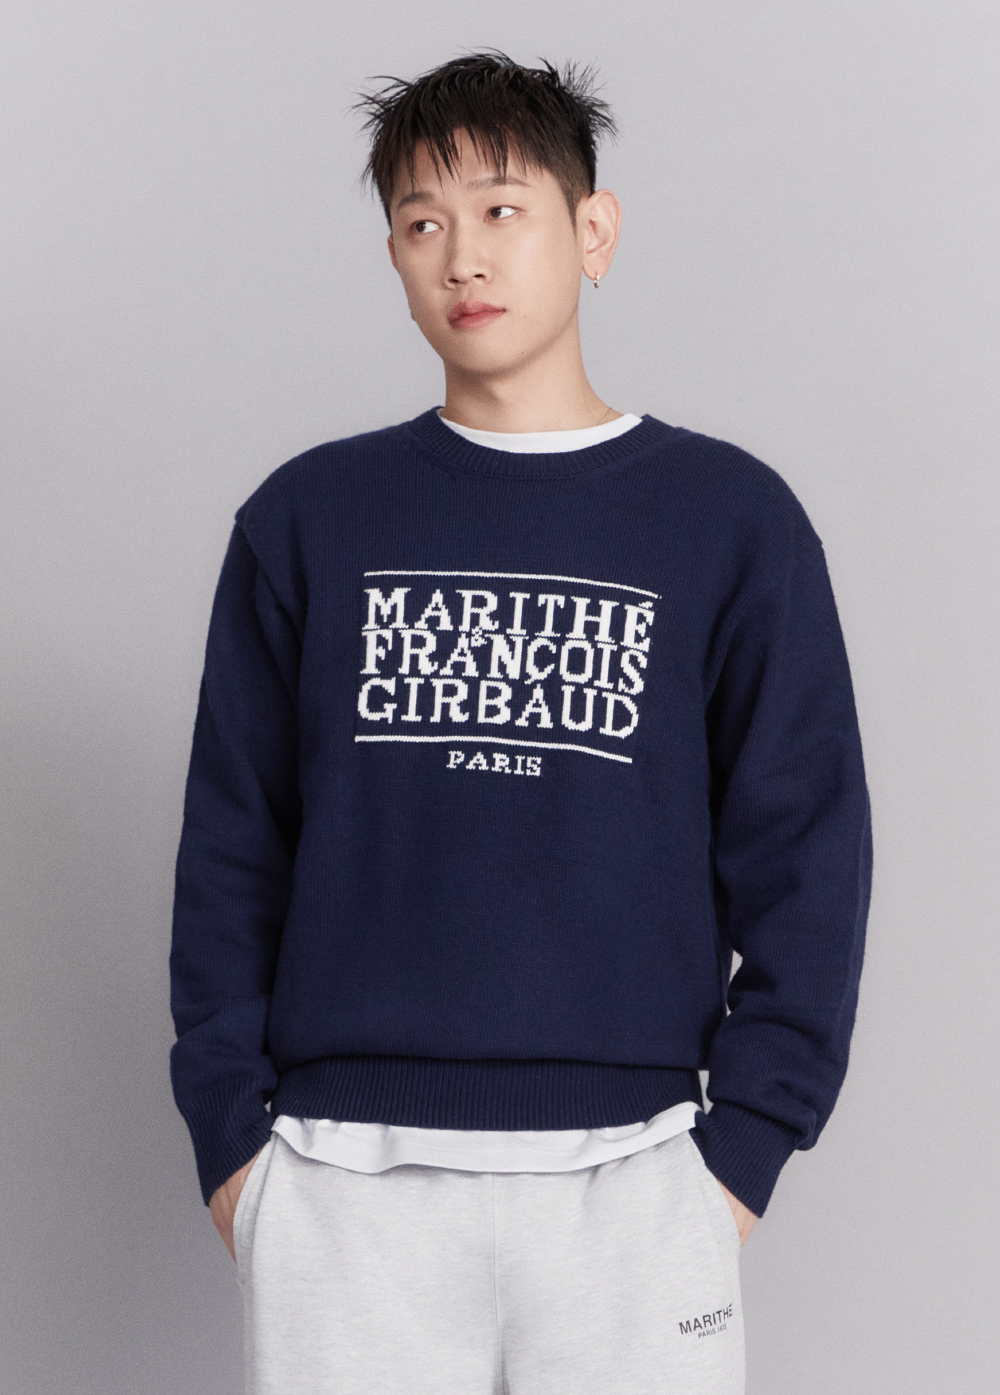 CLASSIC LOGO KNIT PULLOVER navy - MARITHE FRANCOIS GIRBAUD